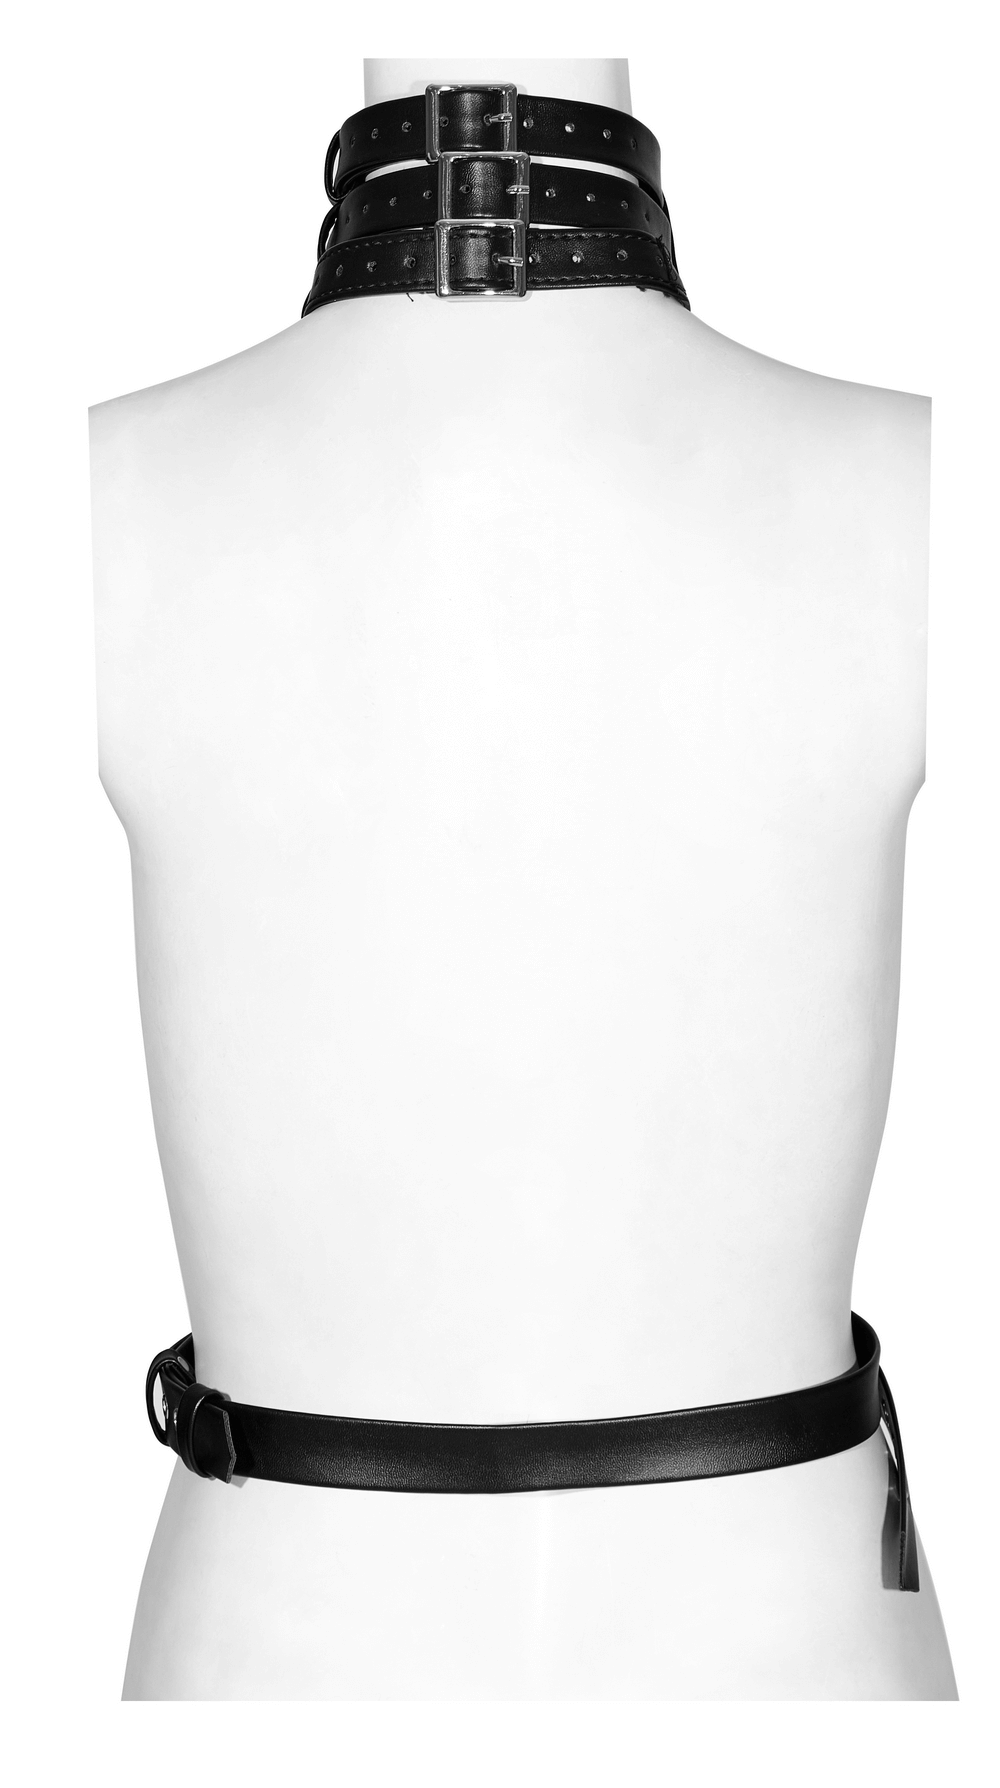 Edgy Women's PU Leather Body Harness with Choker